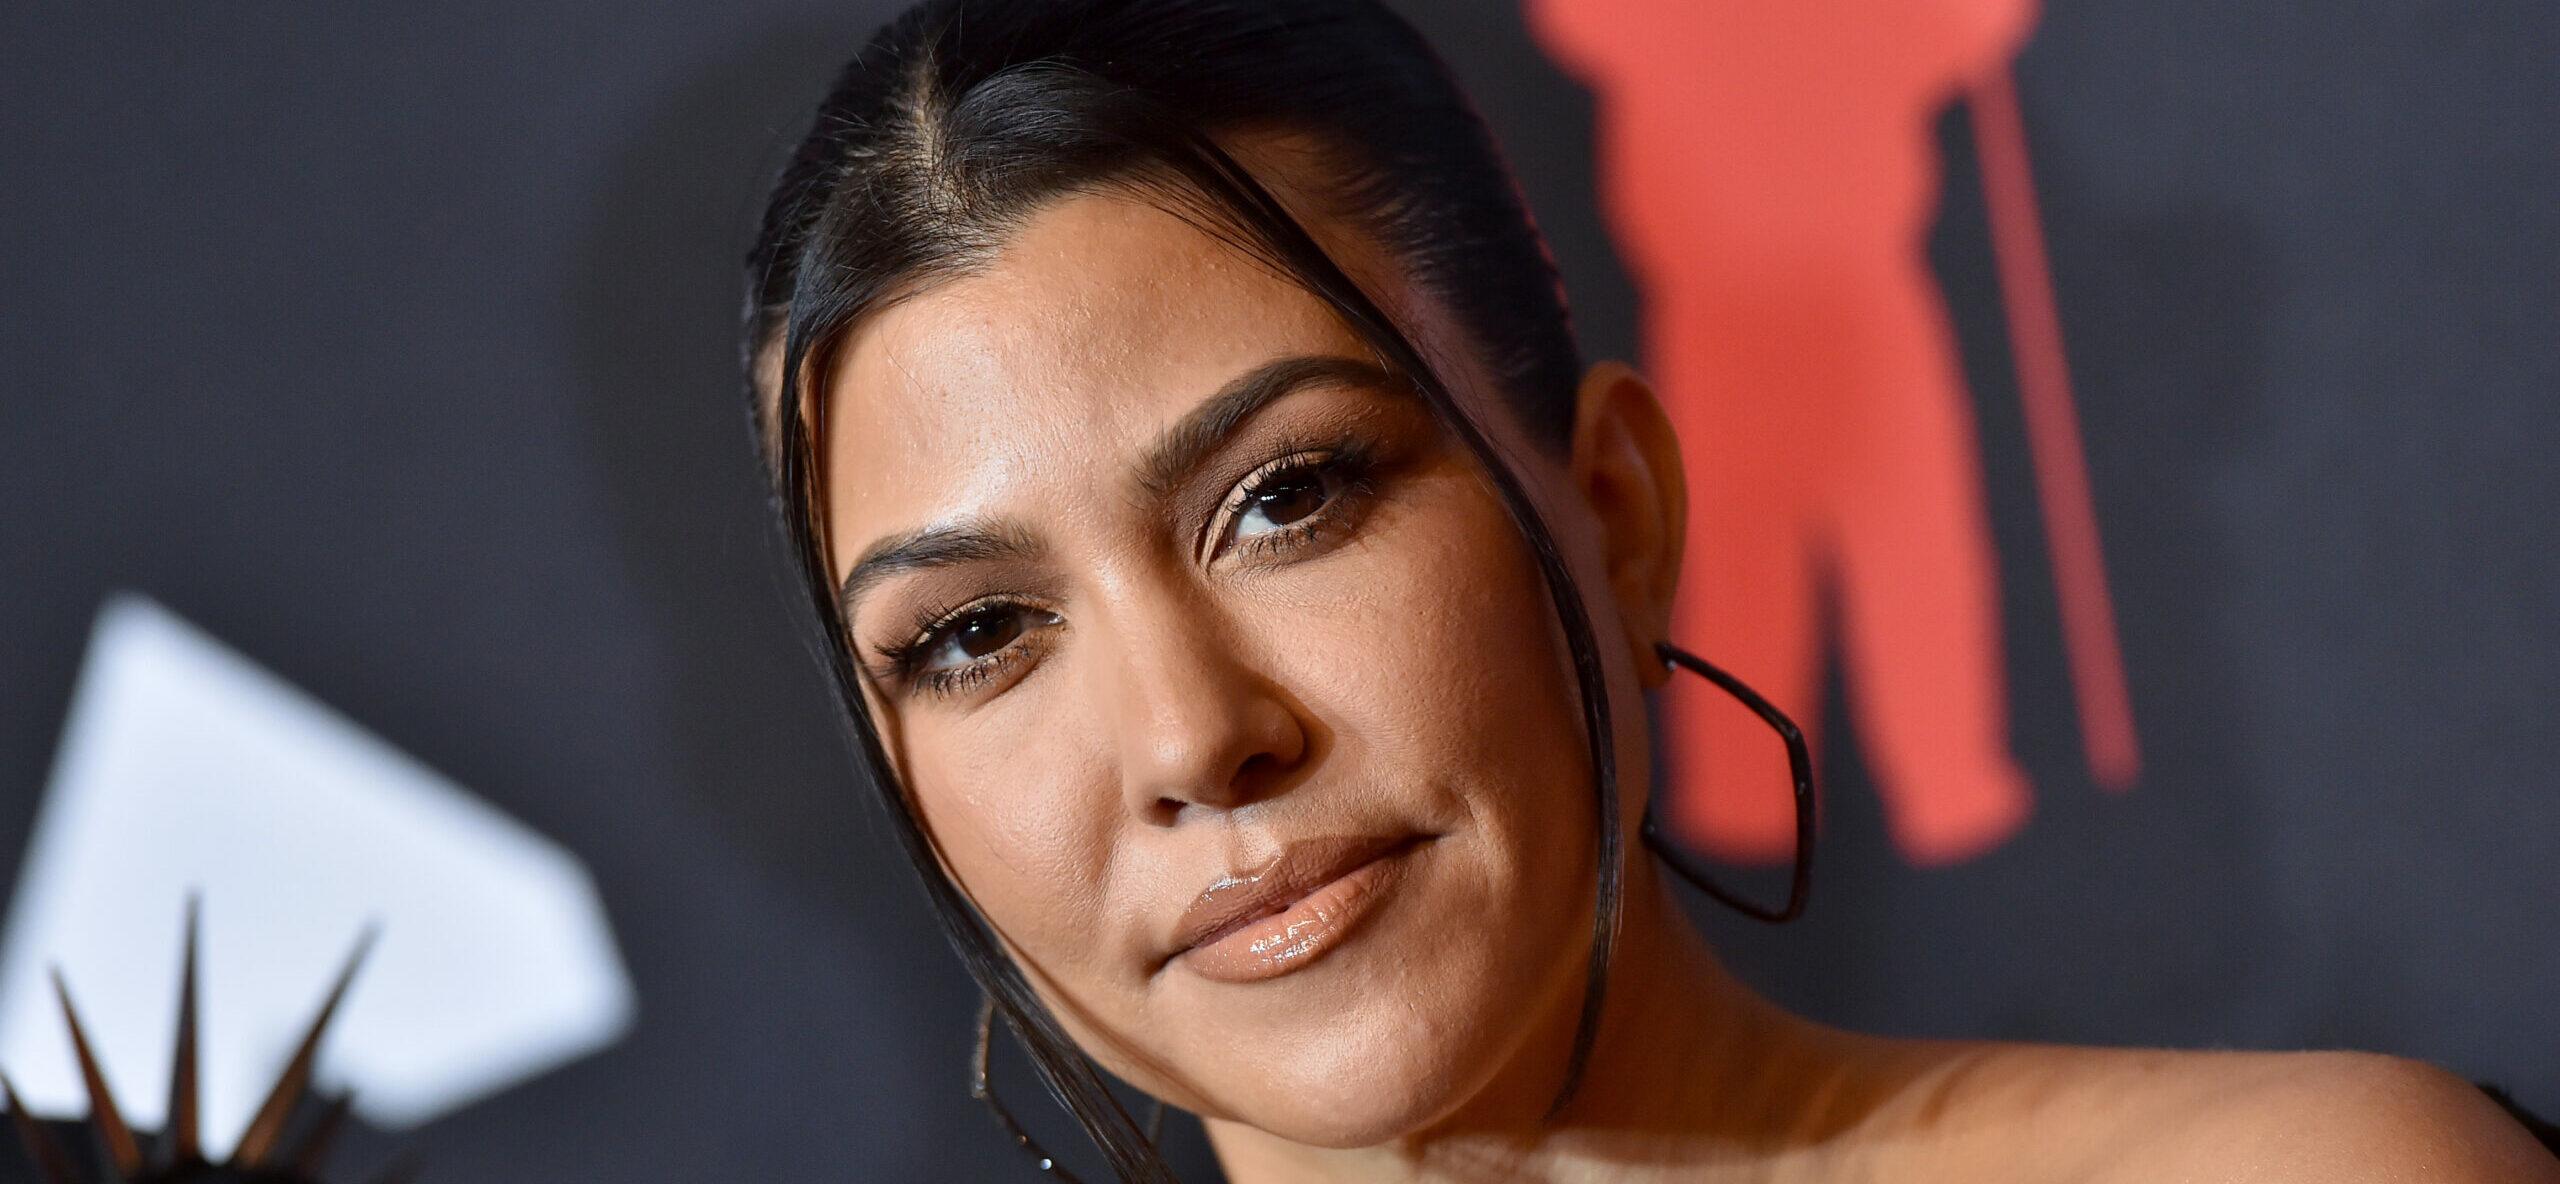 Kourtney Kardashian: ‘Couldn’t Have Dreamed Up Anything Like Them’